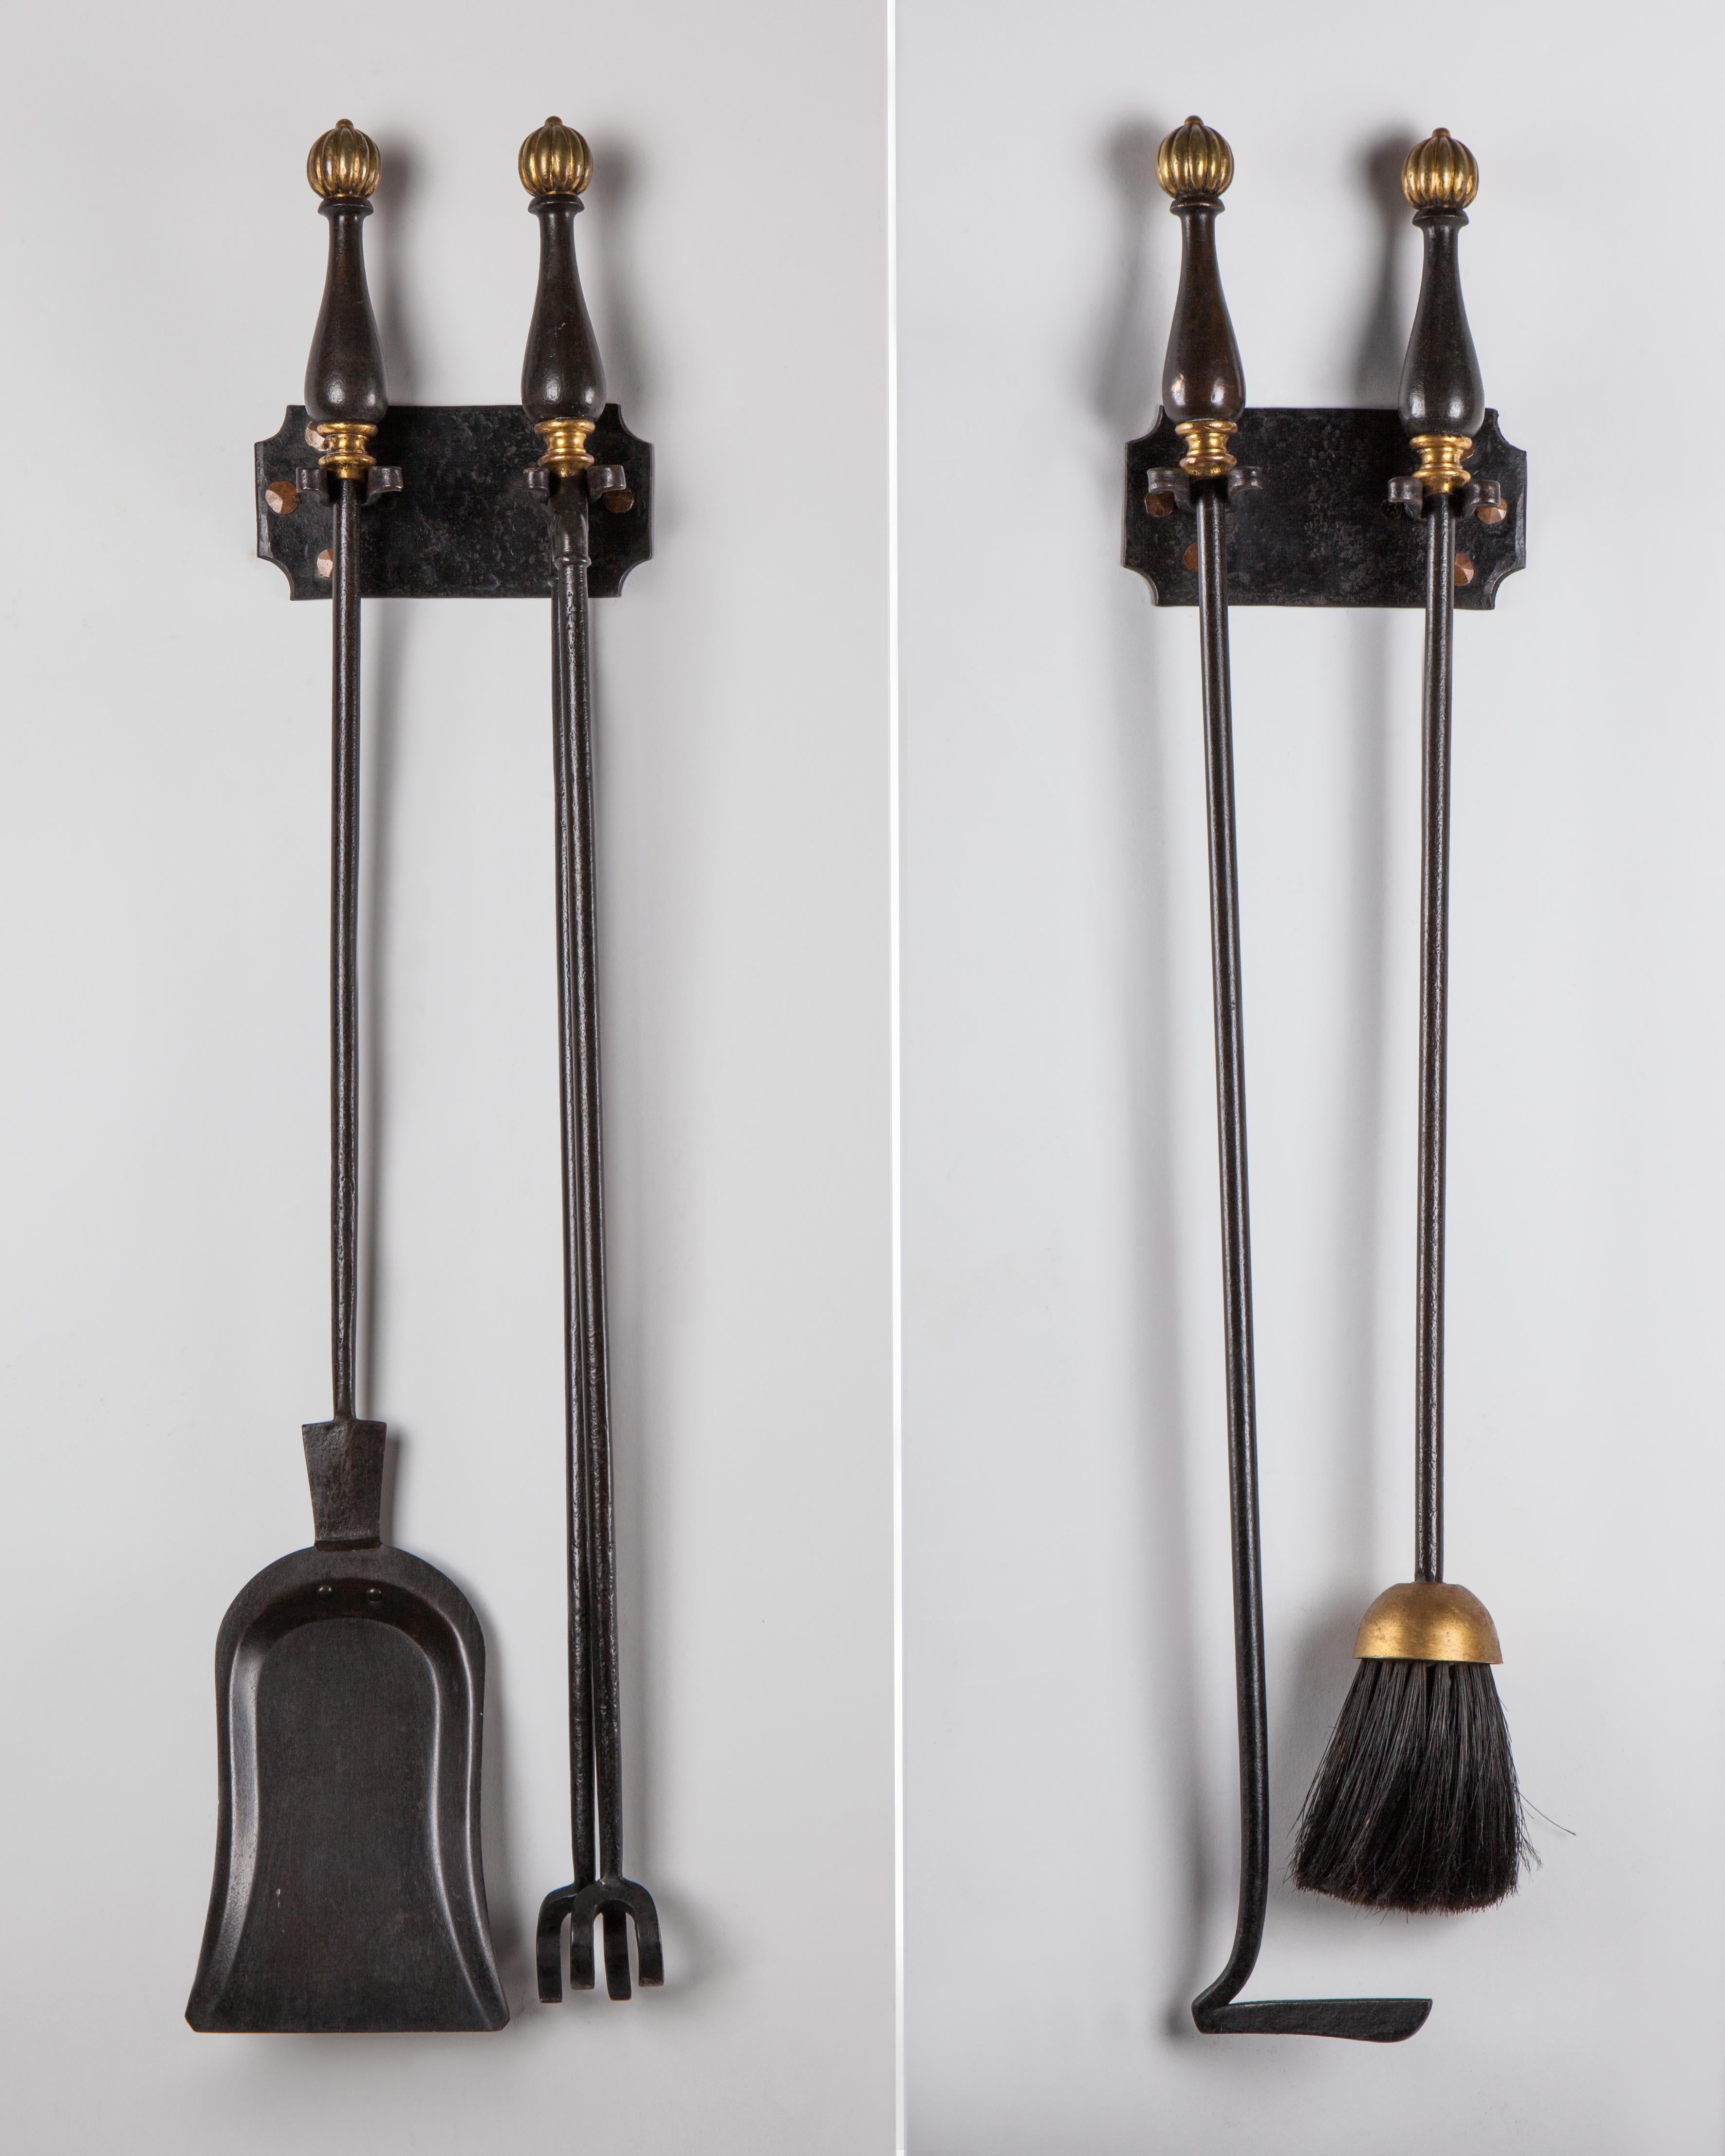 AFP0558

circa 1930
A set of wrought iron and bronze fireplace tools with blackened and gilded details which hang from a pair of wall mounted brackets. Attributed to the New York maker Sterling Bronze Co.

Dimensions:
Overall: 29